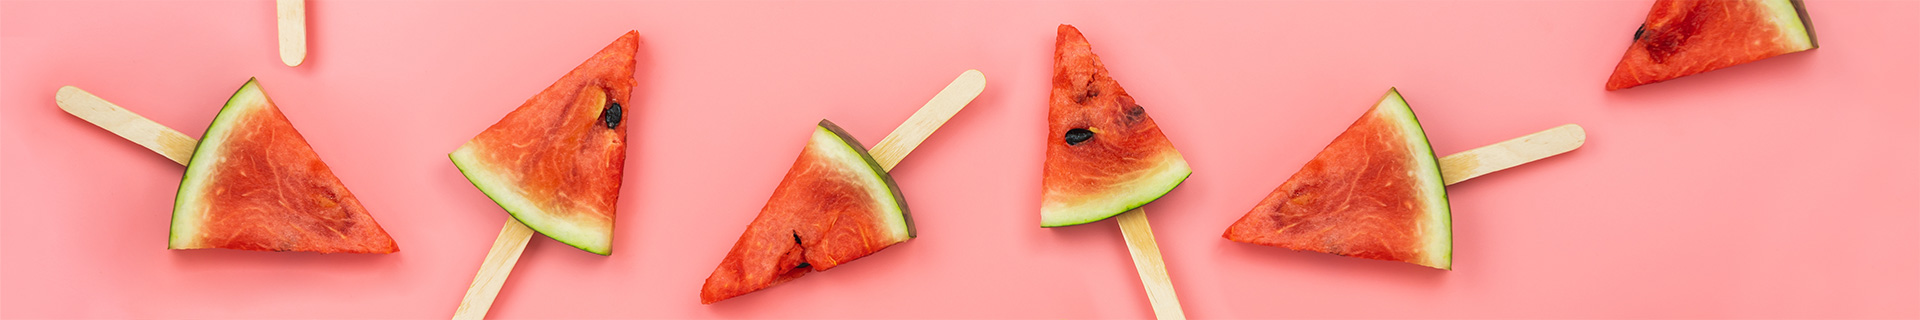 Watermelon on sticks against a pink background